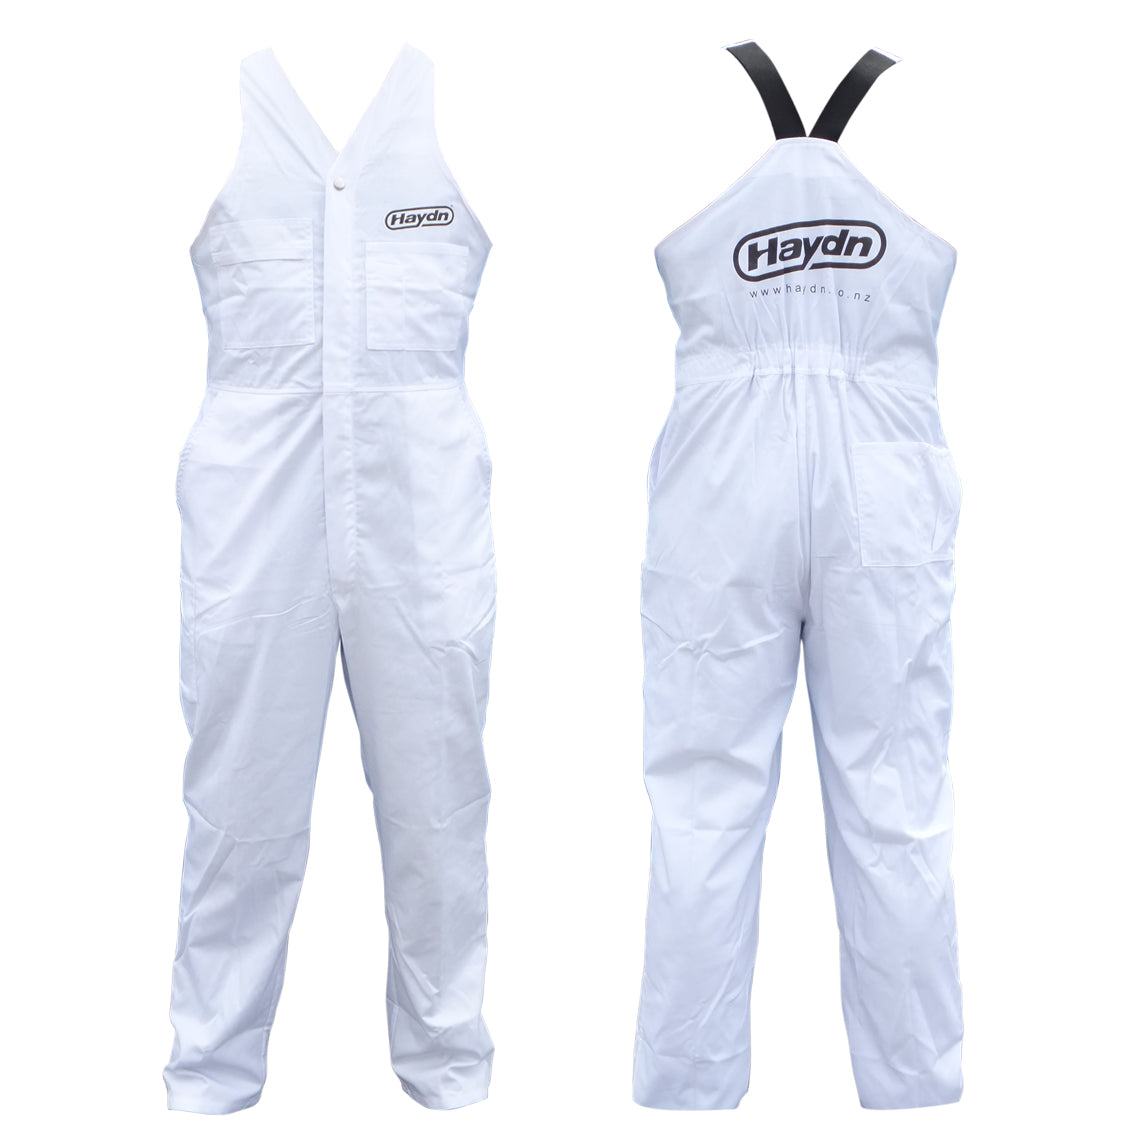 Easy Action Overalls